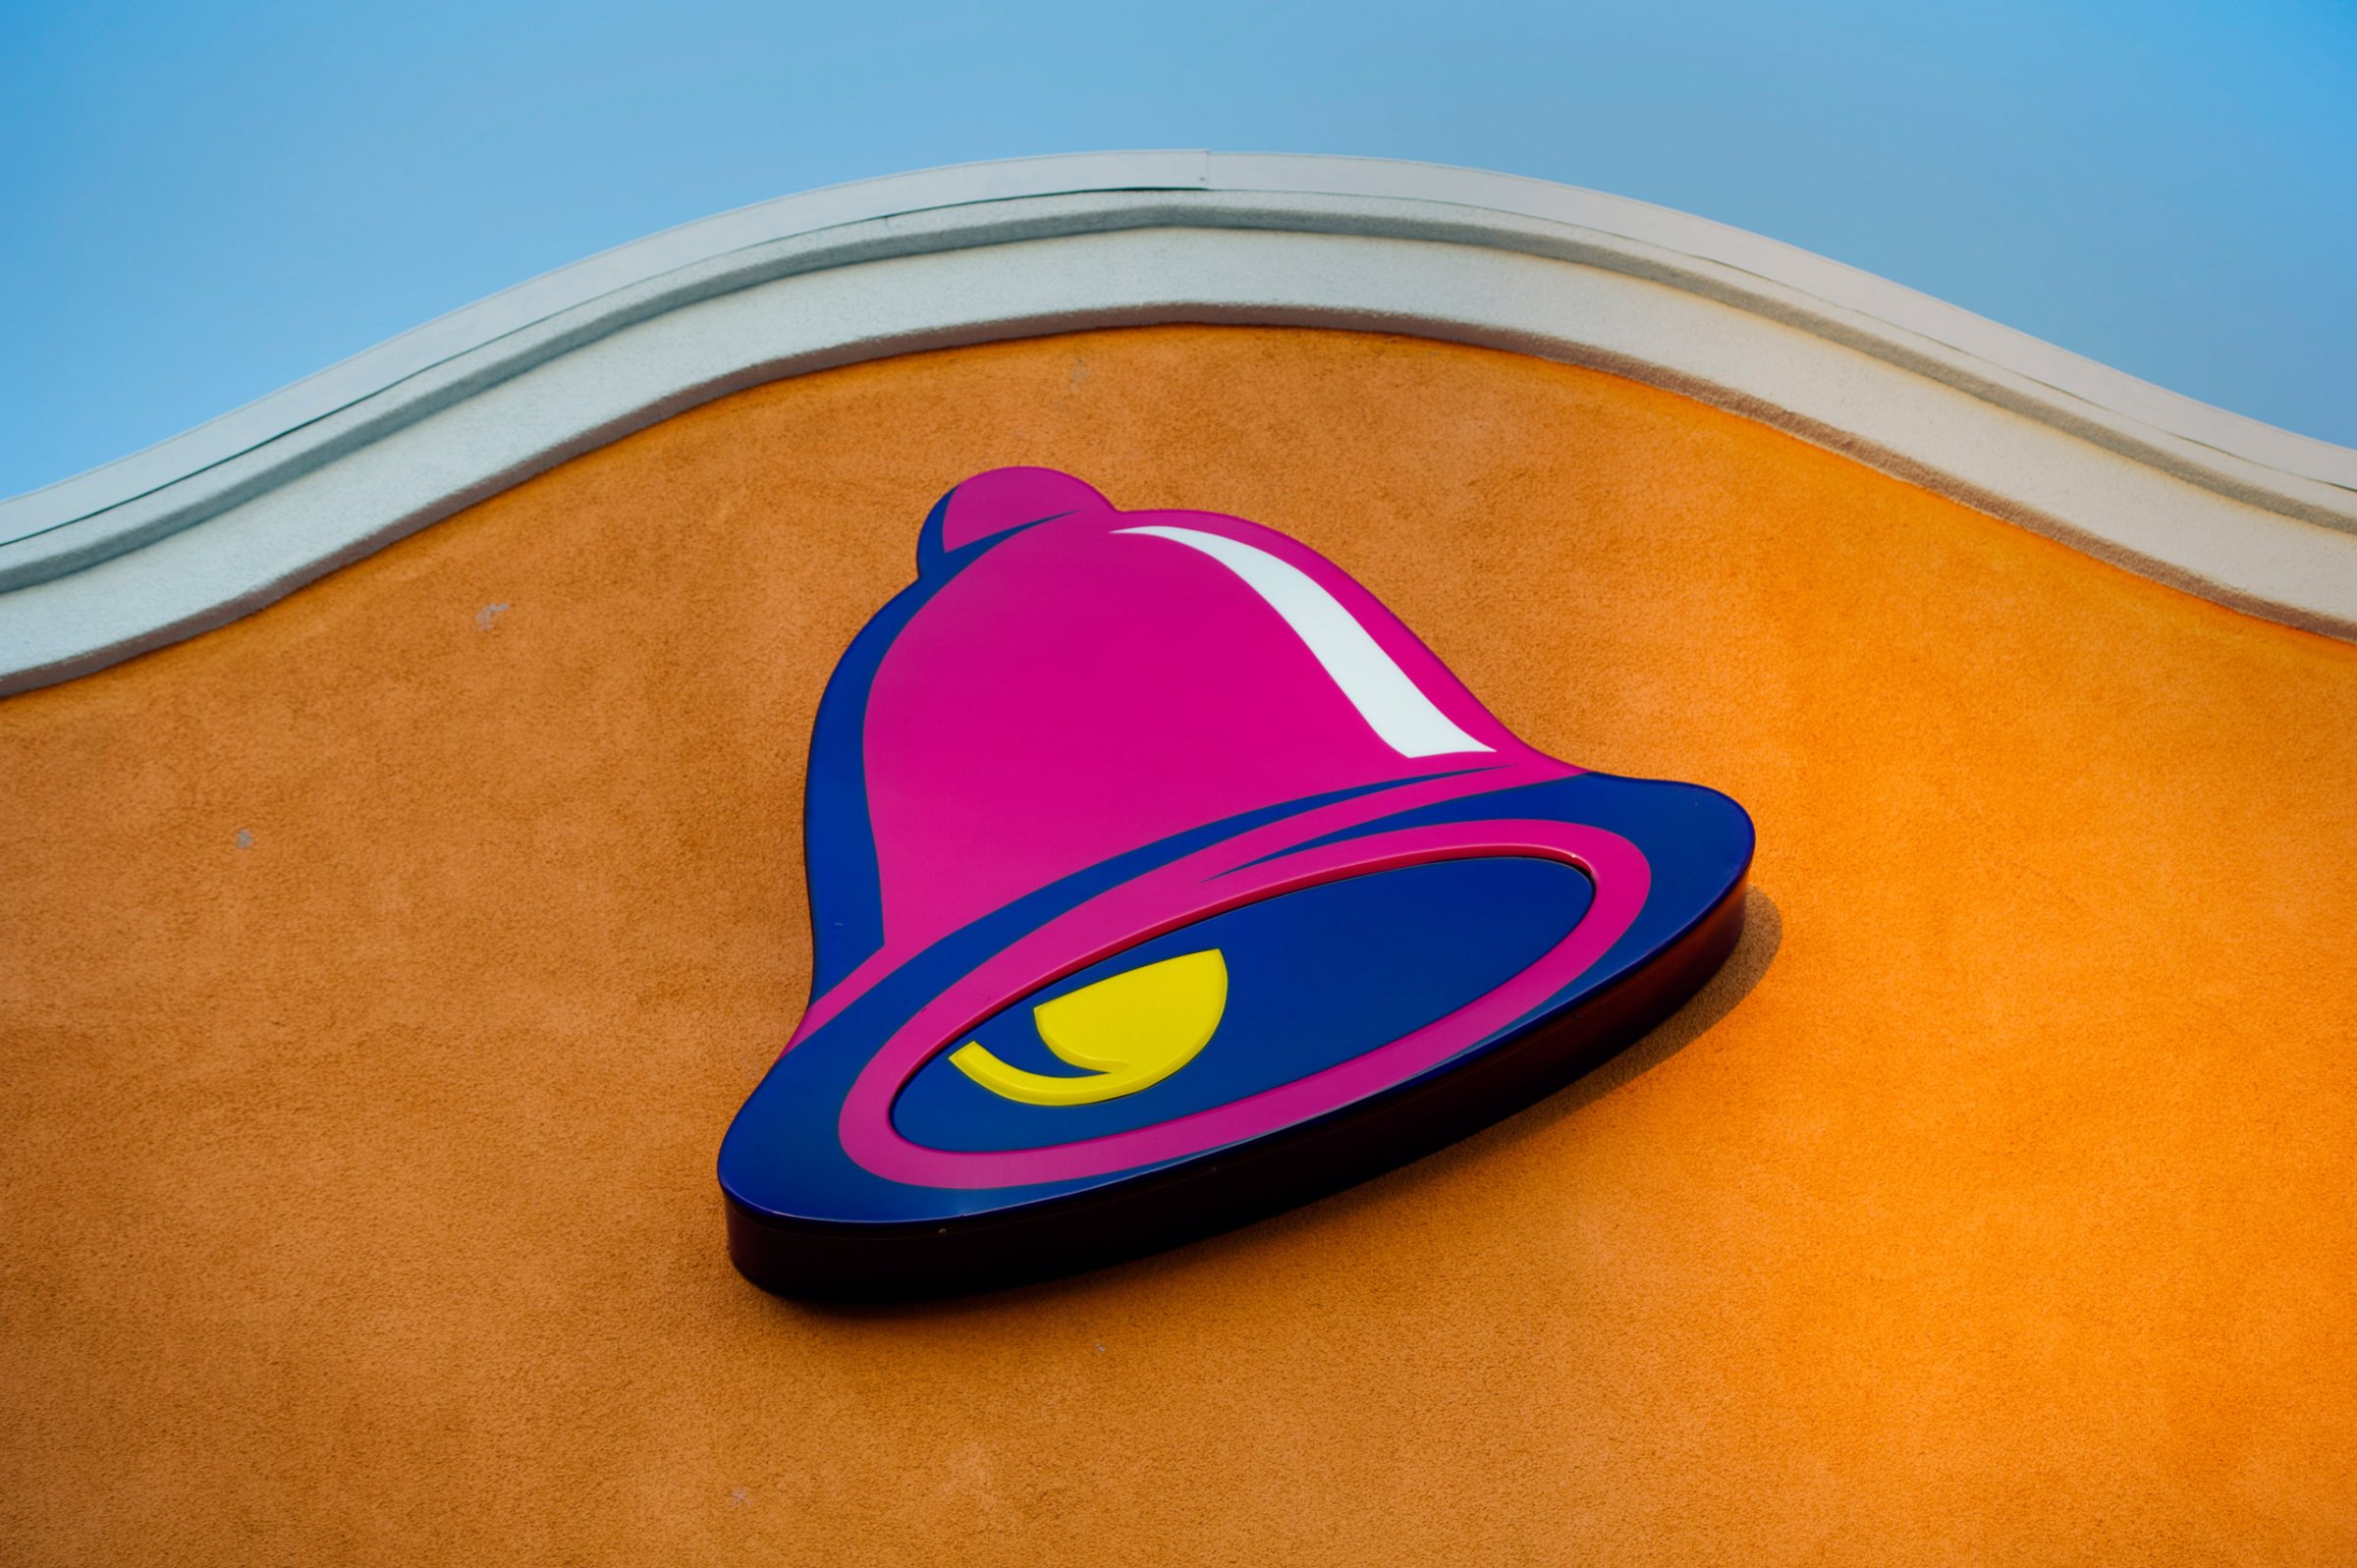 The logo for Taco Bell, a unit of Yum! Brands Inc., is displayed outside of a restaurant in Daly City, California, U.S., on Friday, April 18, 2014. Yum! Brands Inc. is expected to release earnings figures on April 22. Photographer: David Paul Morris/Bloomberg via Getty Images